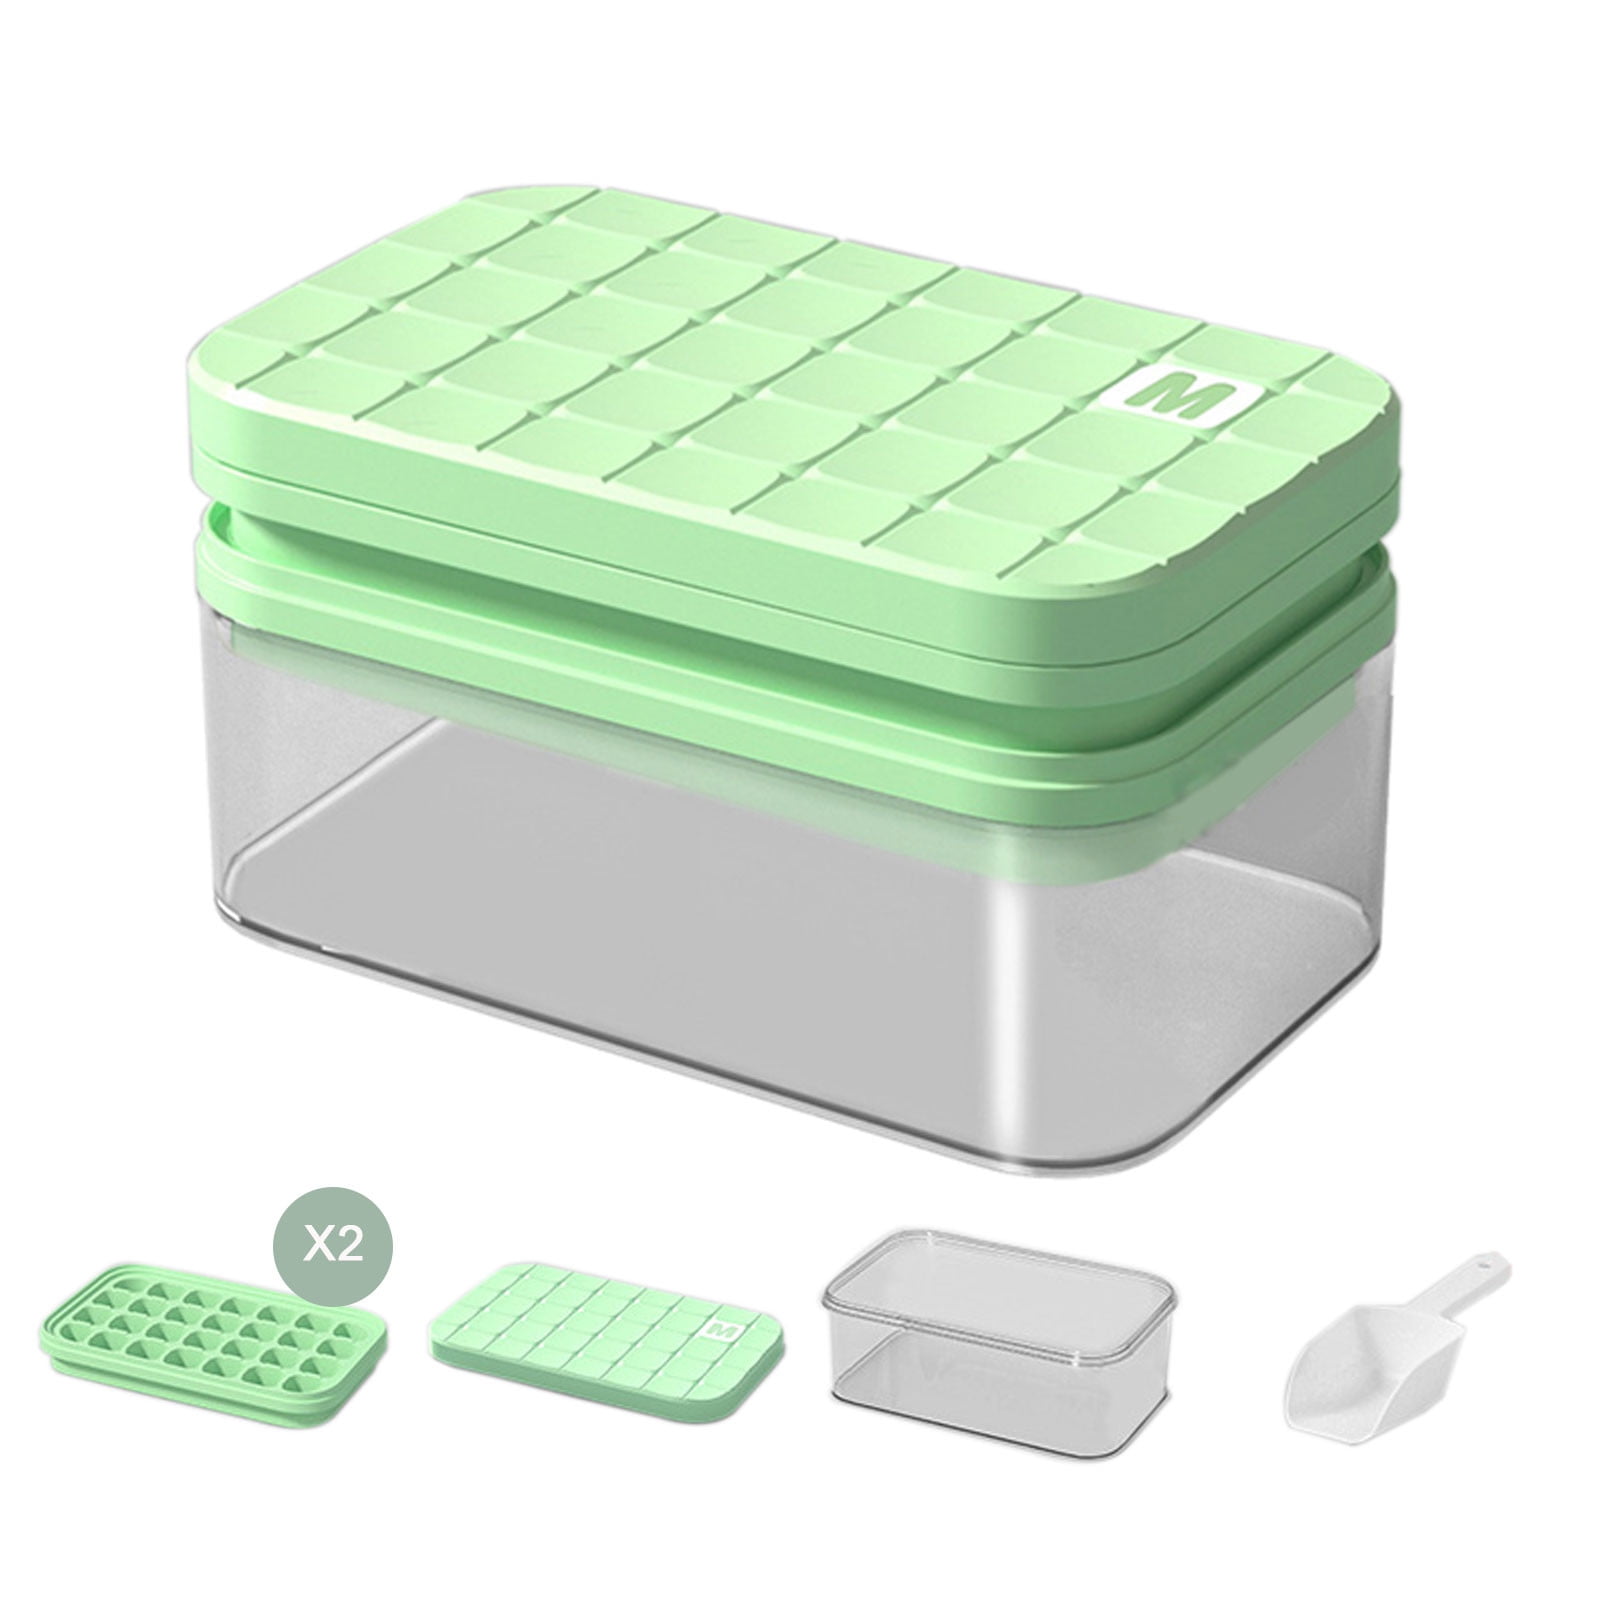 FOSSILICED Ice Trays - Eclectic - Ice Trays And Molds - by 2Shopper, Inc. |  Houzz